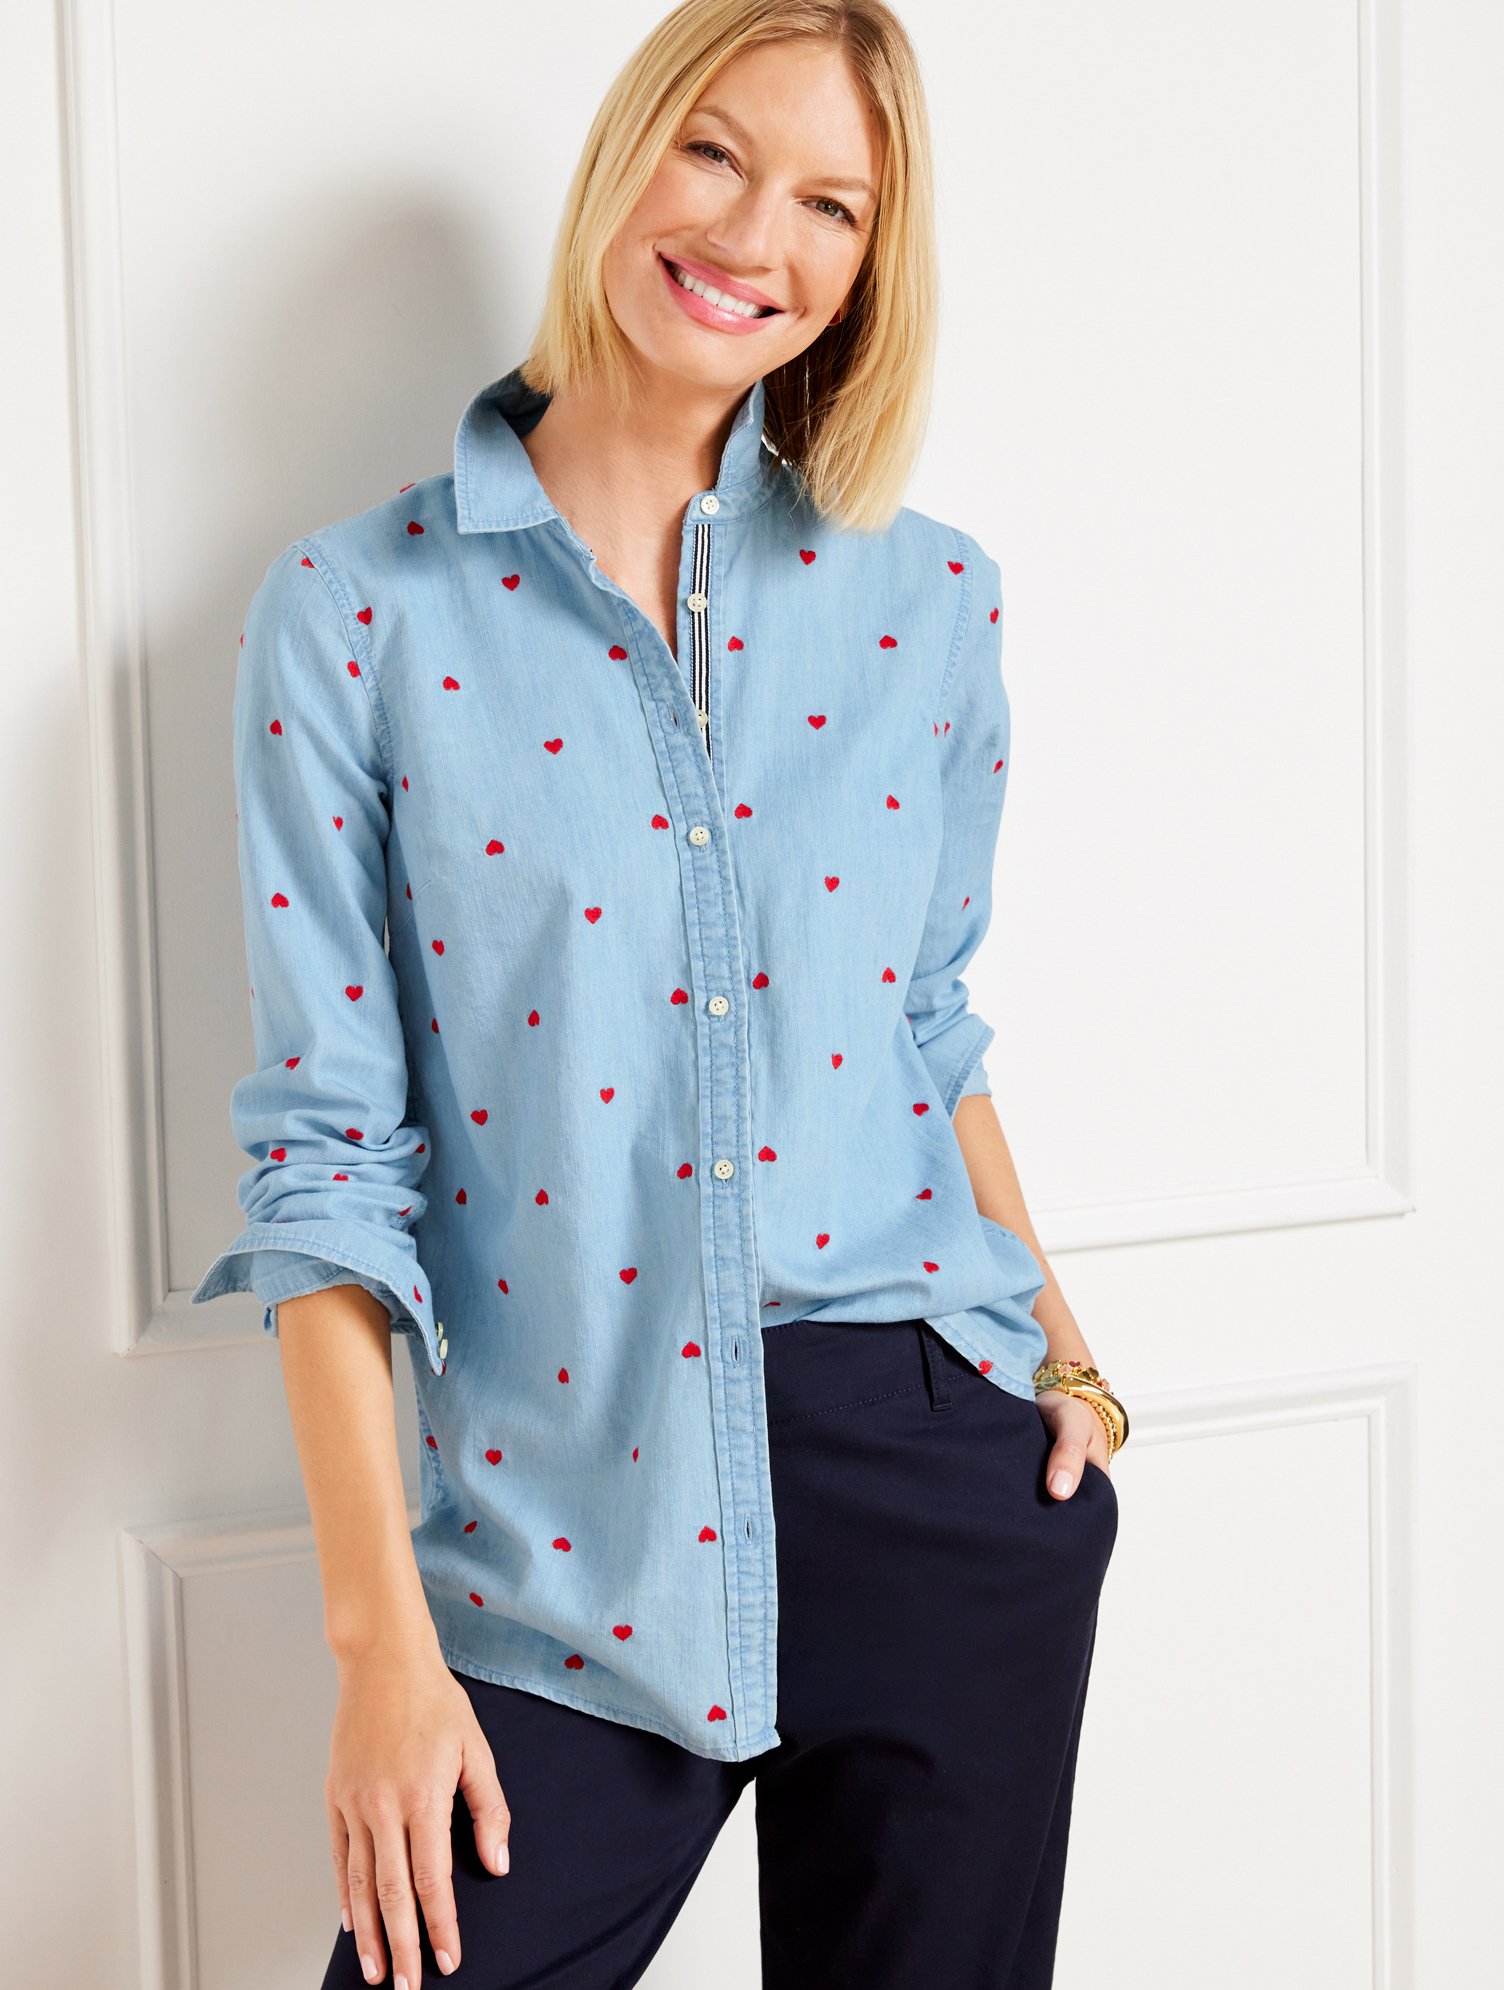 Talbots Petite - Denim Button Front Shirt - Embroidered Hearts - Light Blue/red - 2xs - 100% Cotton  In Light Blue,red